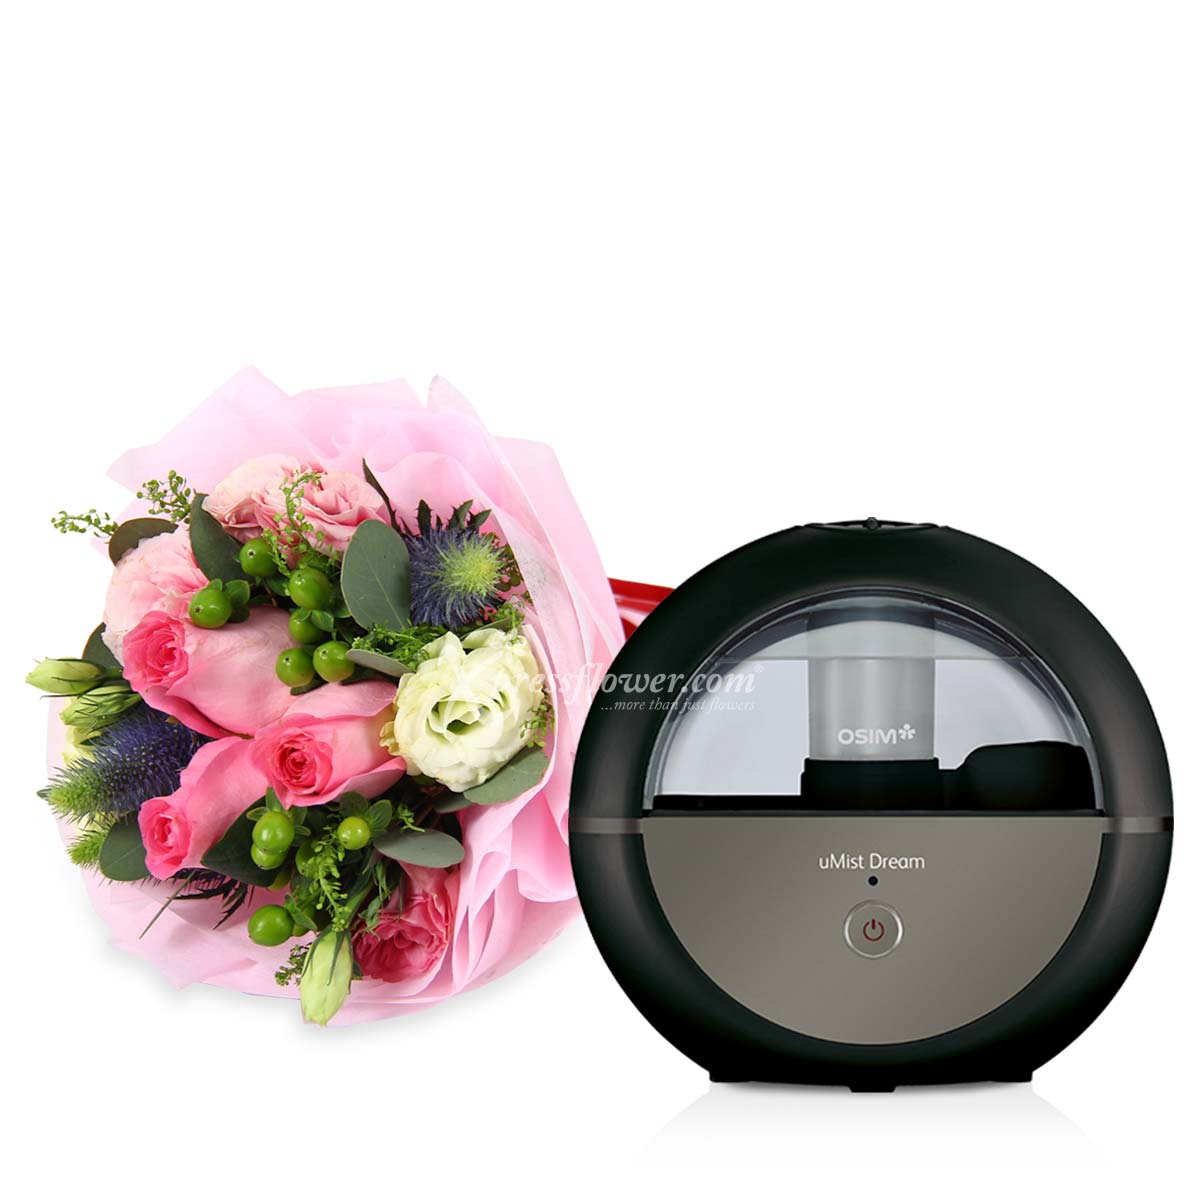 uMist Dream Air Humidifier (3 Pink Roses with OSIM air humidifier)